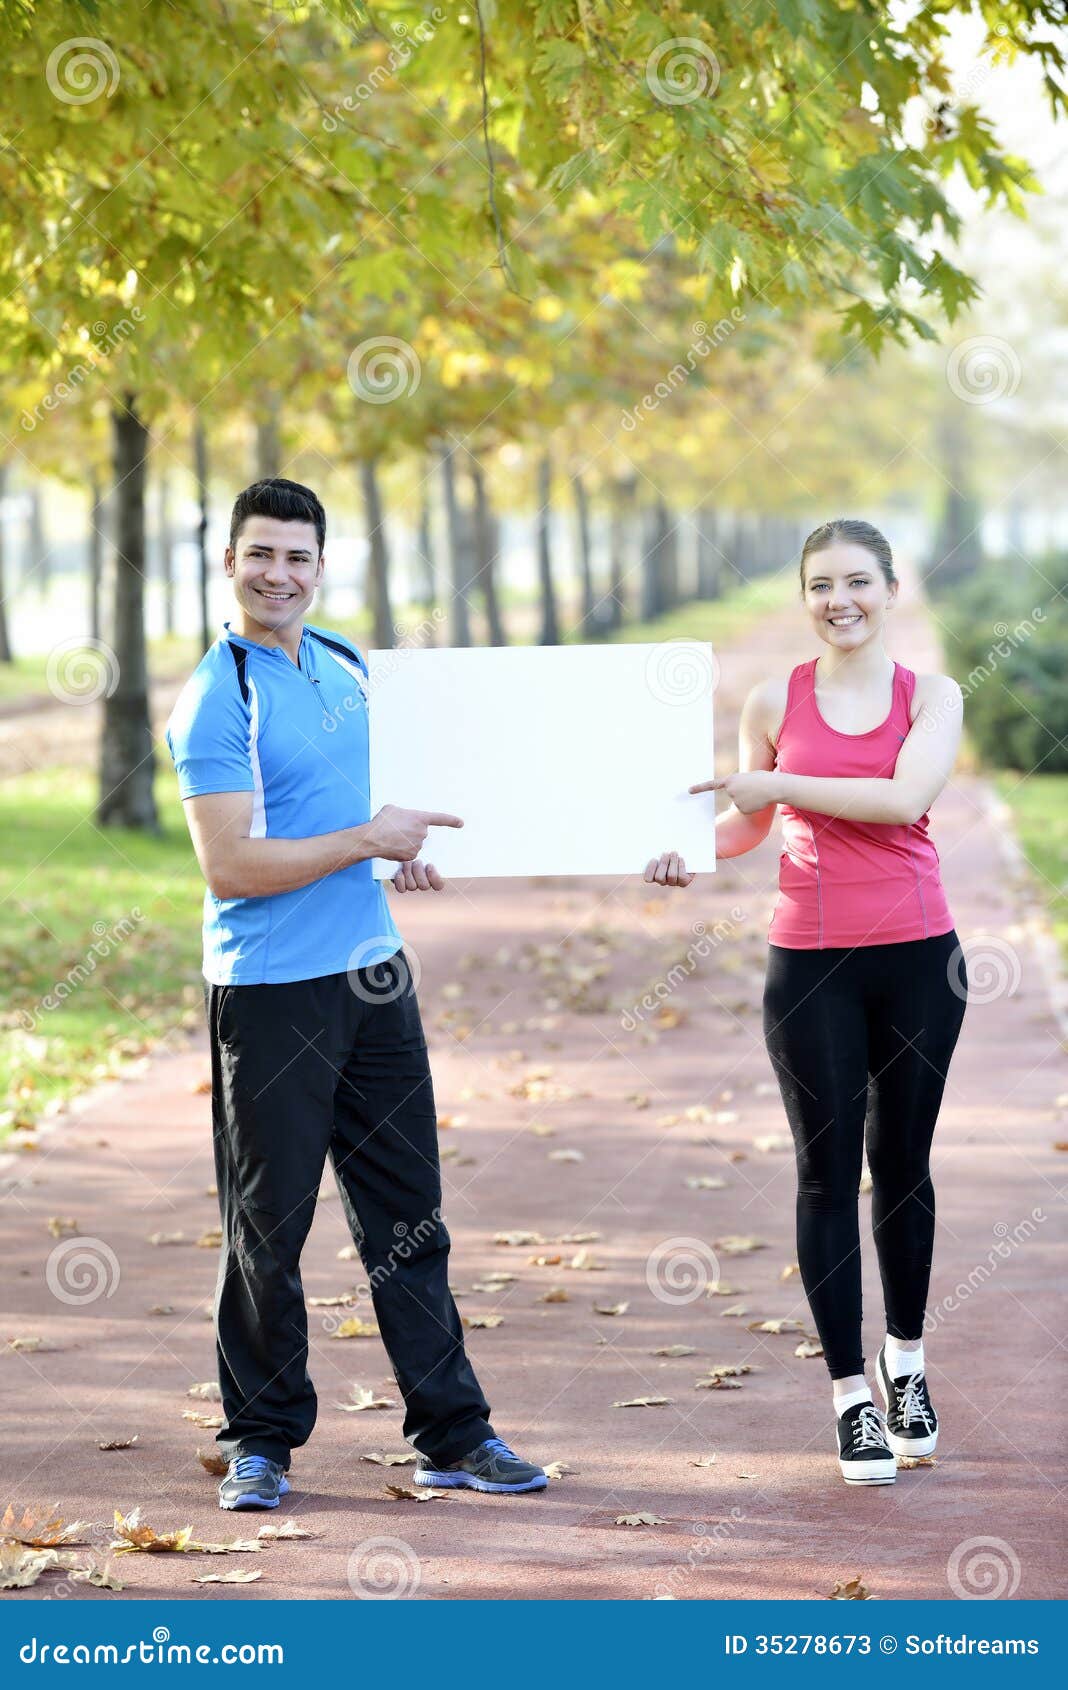 https://thumbs.dreamstime.com/z/young-woman-man-walking-happy-couple-autumn-park-looking-camera-table-holding-hands-pointing-35278673.jpg